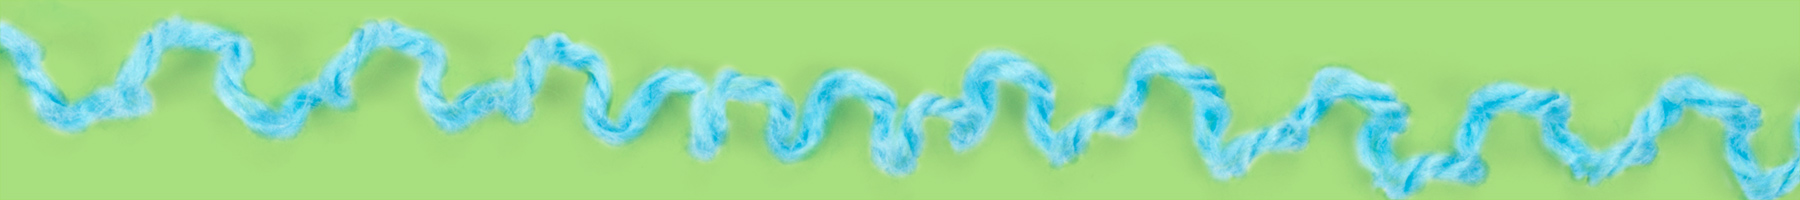 unravelling blue knitting on green background